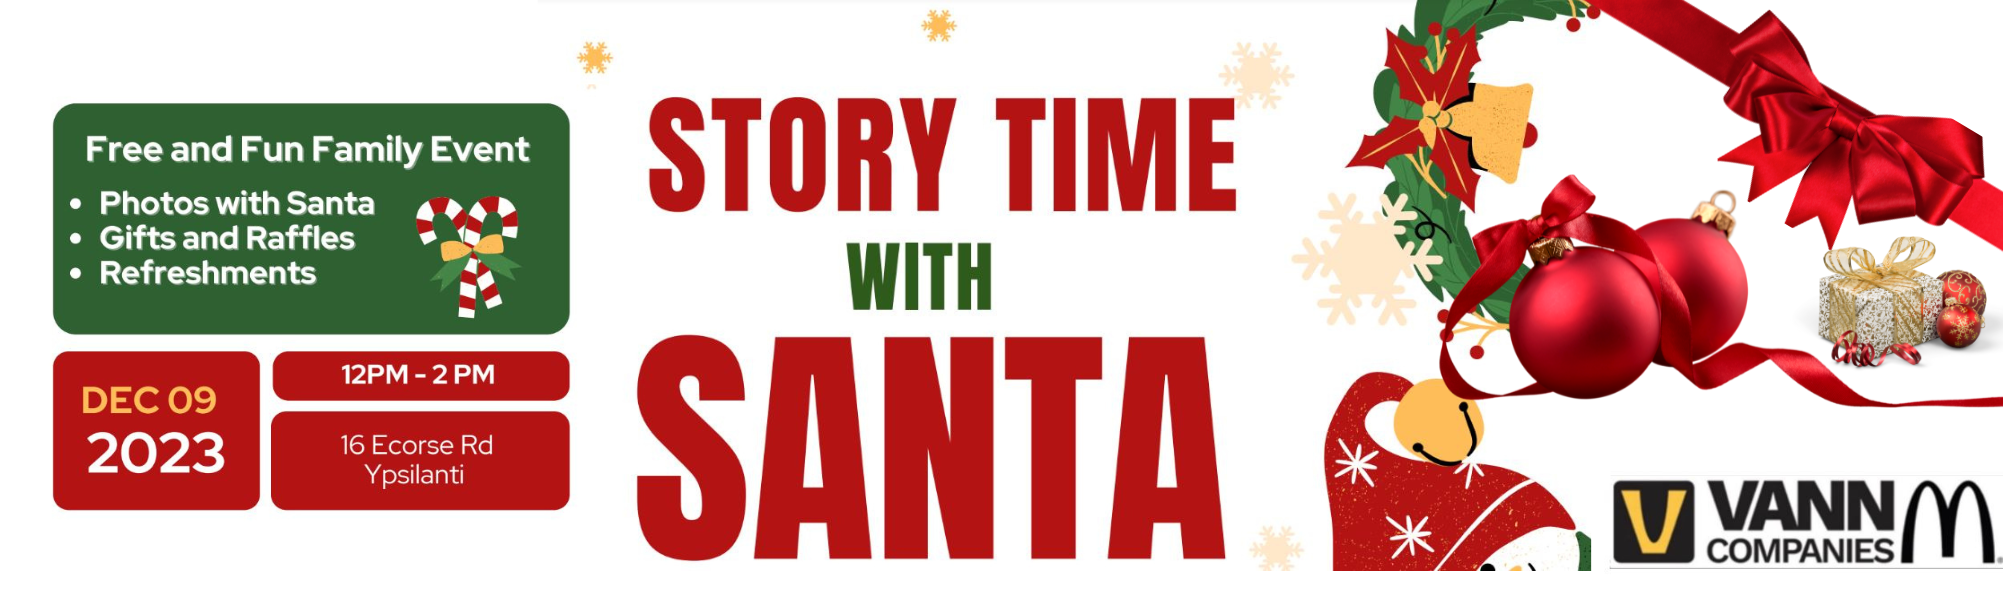 Story Time with Santa December 9, 2023